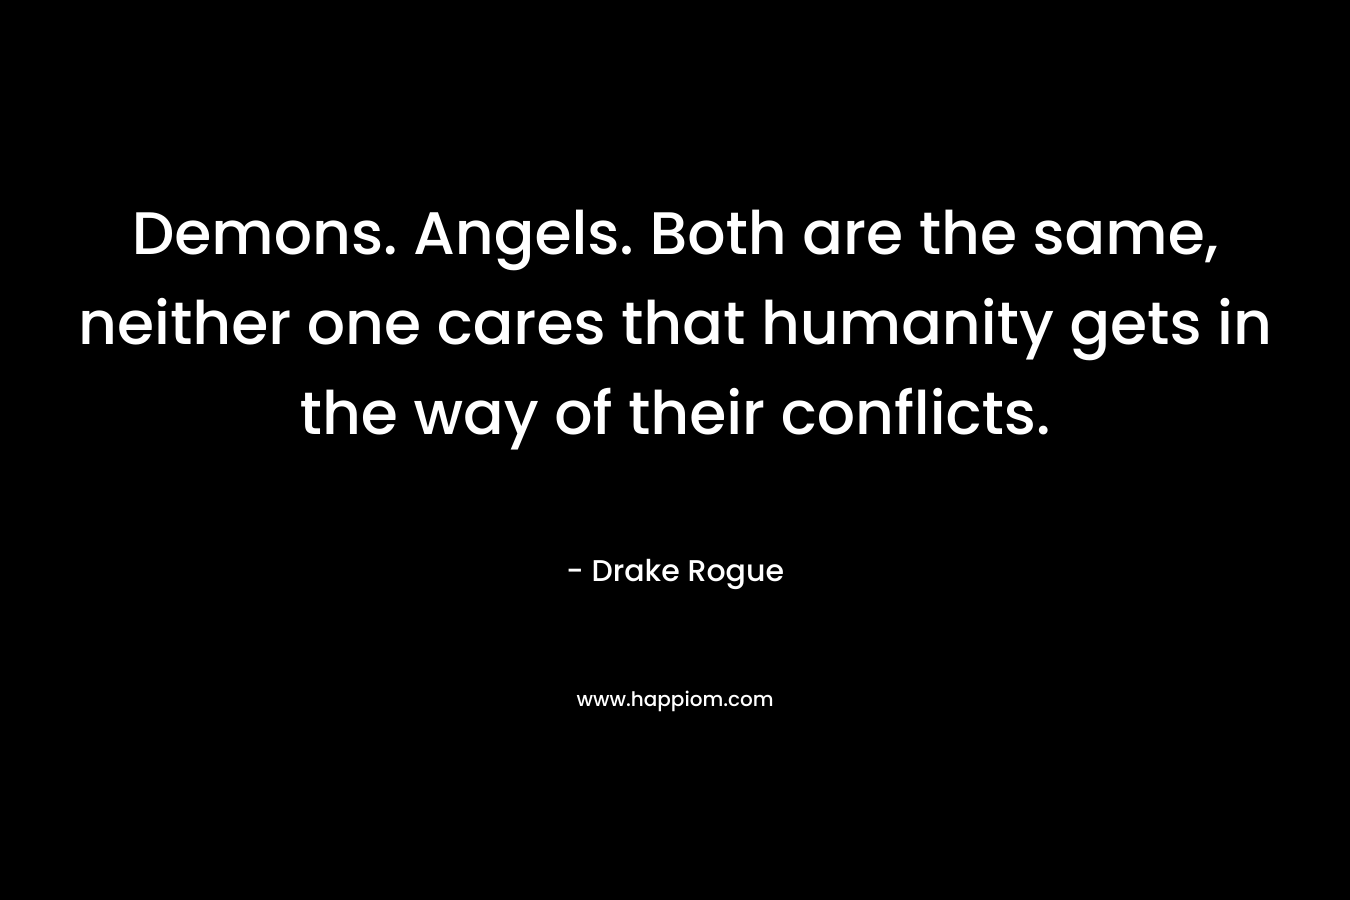 Demons. Angels. Both are the same, neither one cares that humanity gets in the way of their conflicts. – Drake Rogue